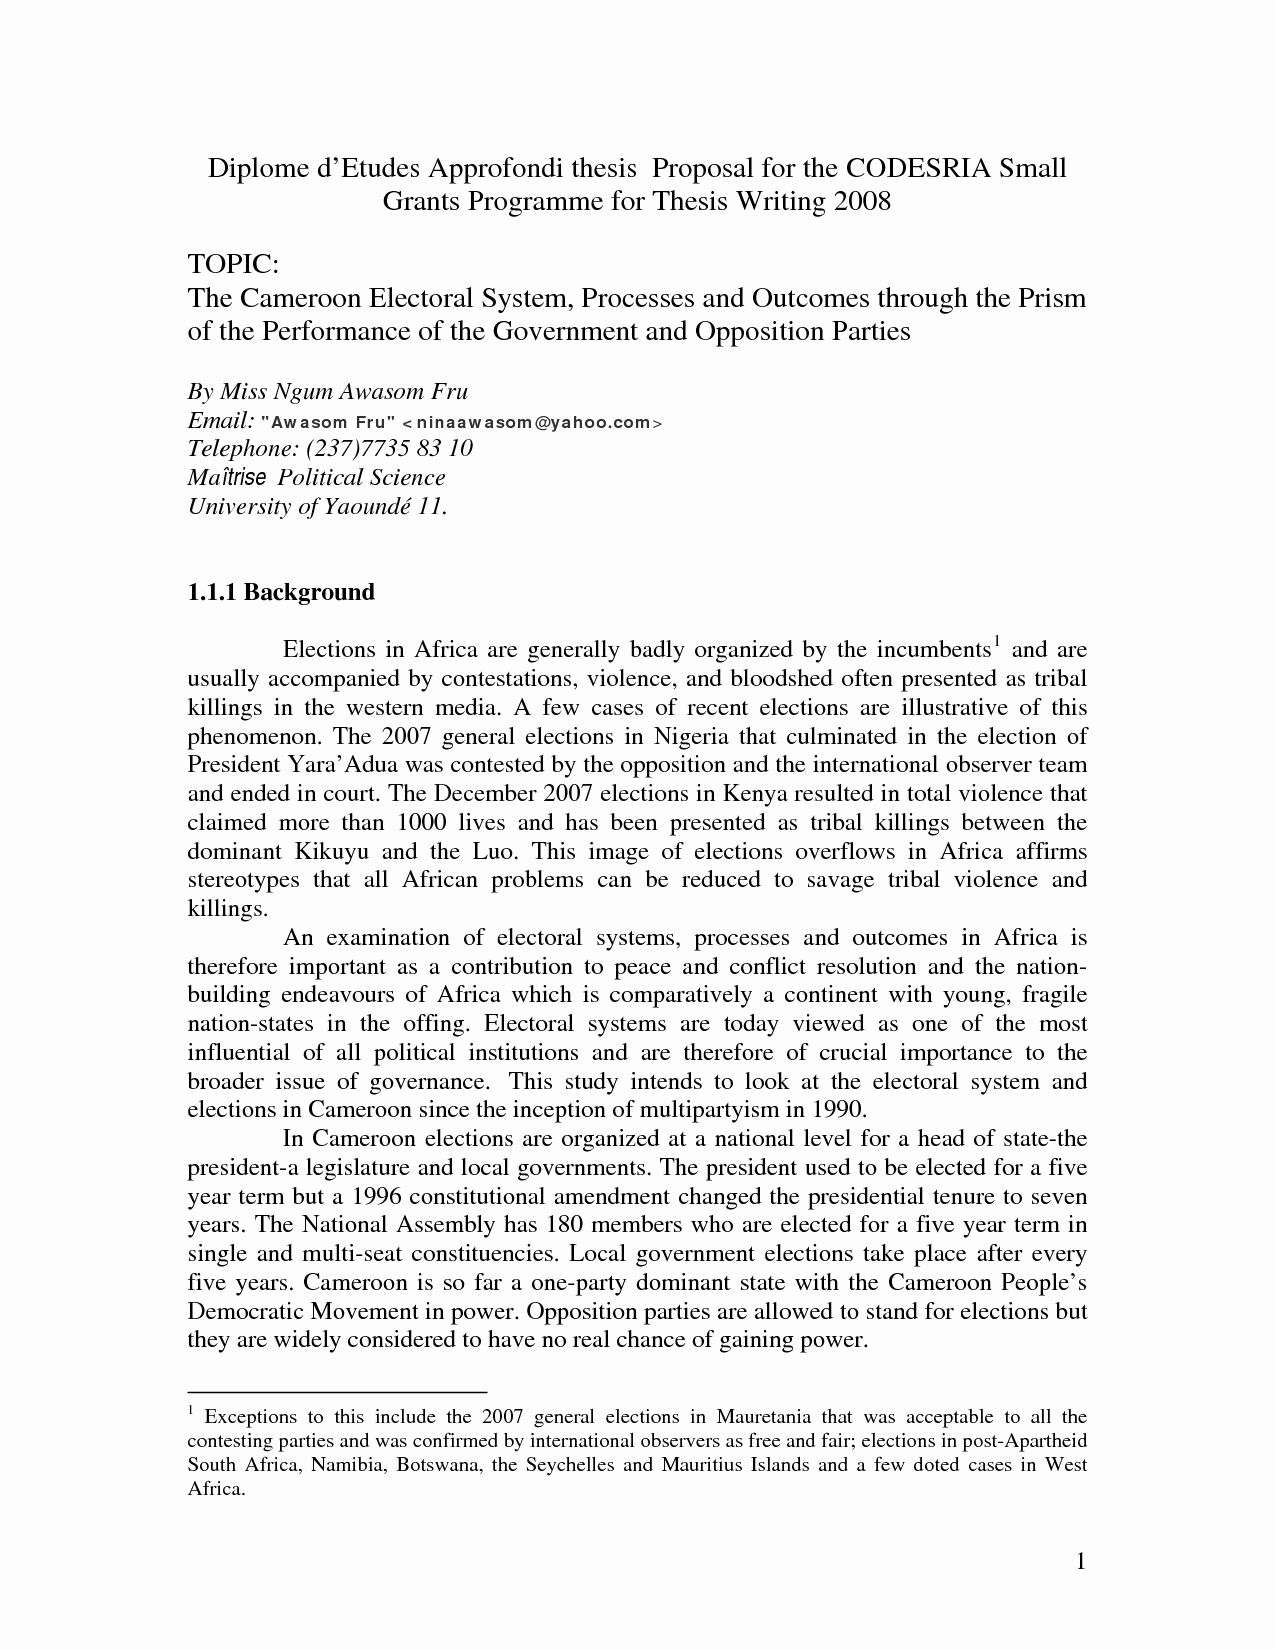 Phd Dissertation Proposal Sample Awesome Sample thesis Proposal Bud